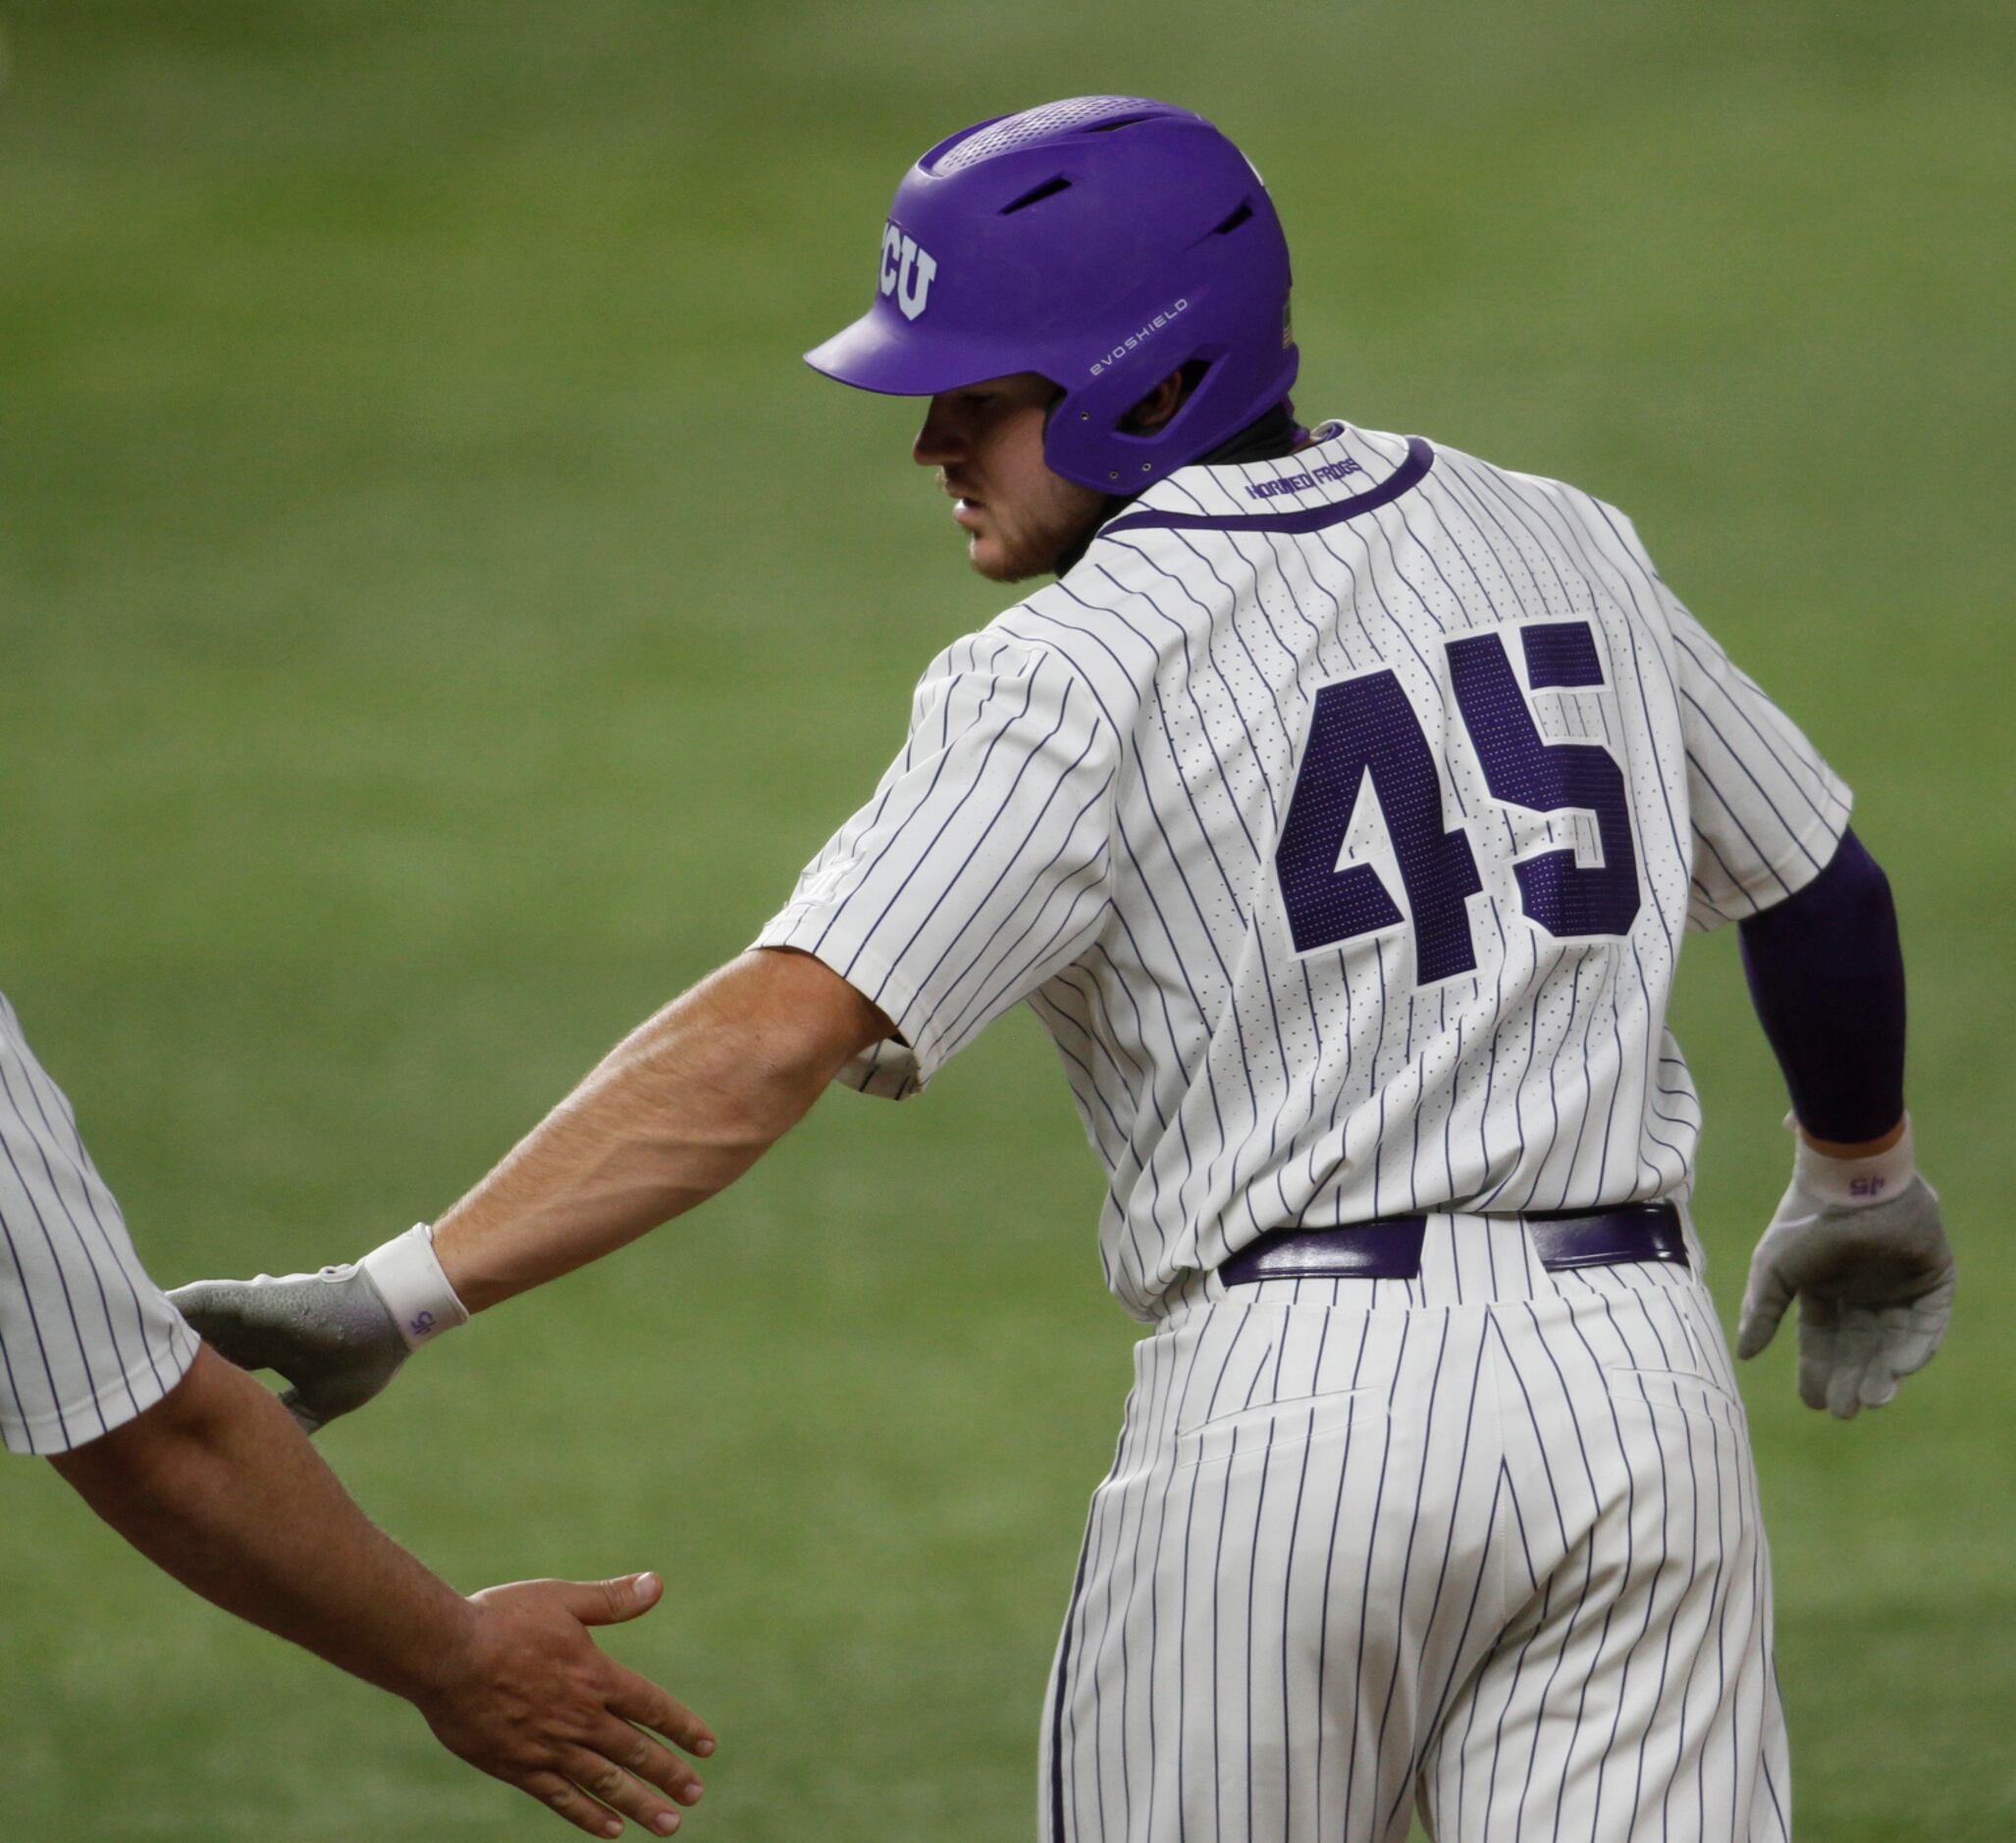 TCU outfielder Luke Boyers (45) reaches back to exchange a "low five" with the first base...